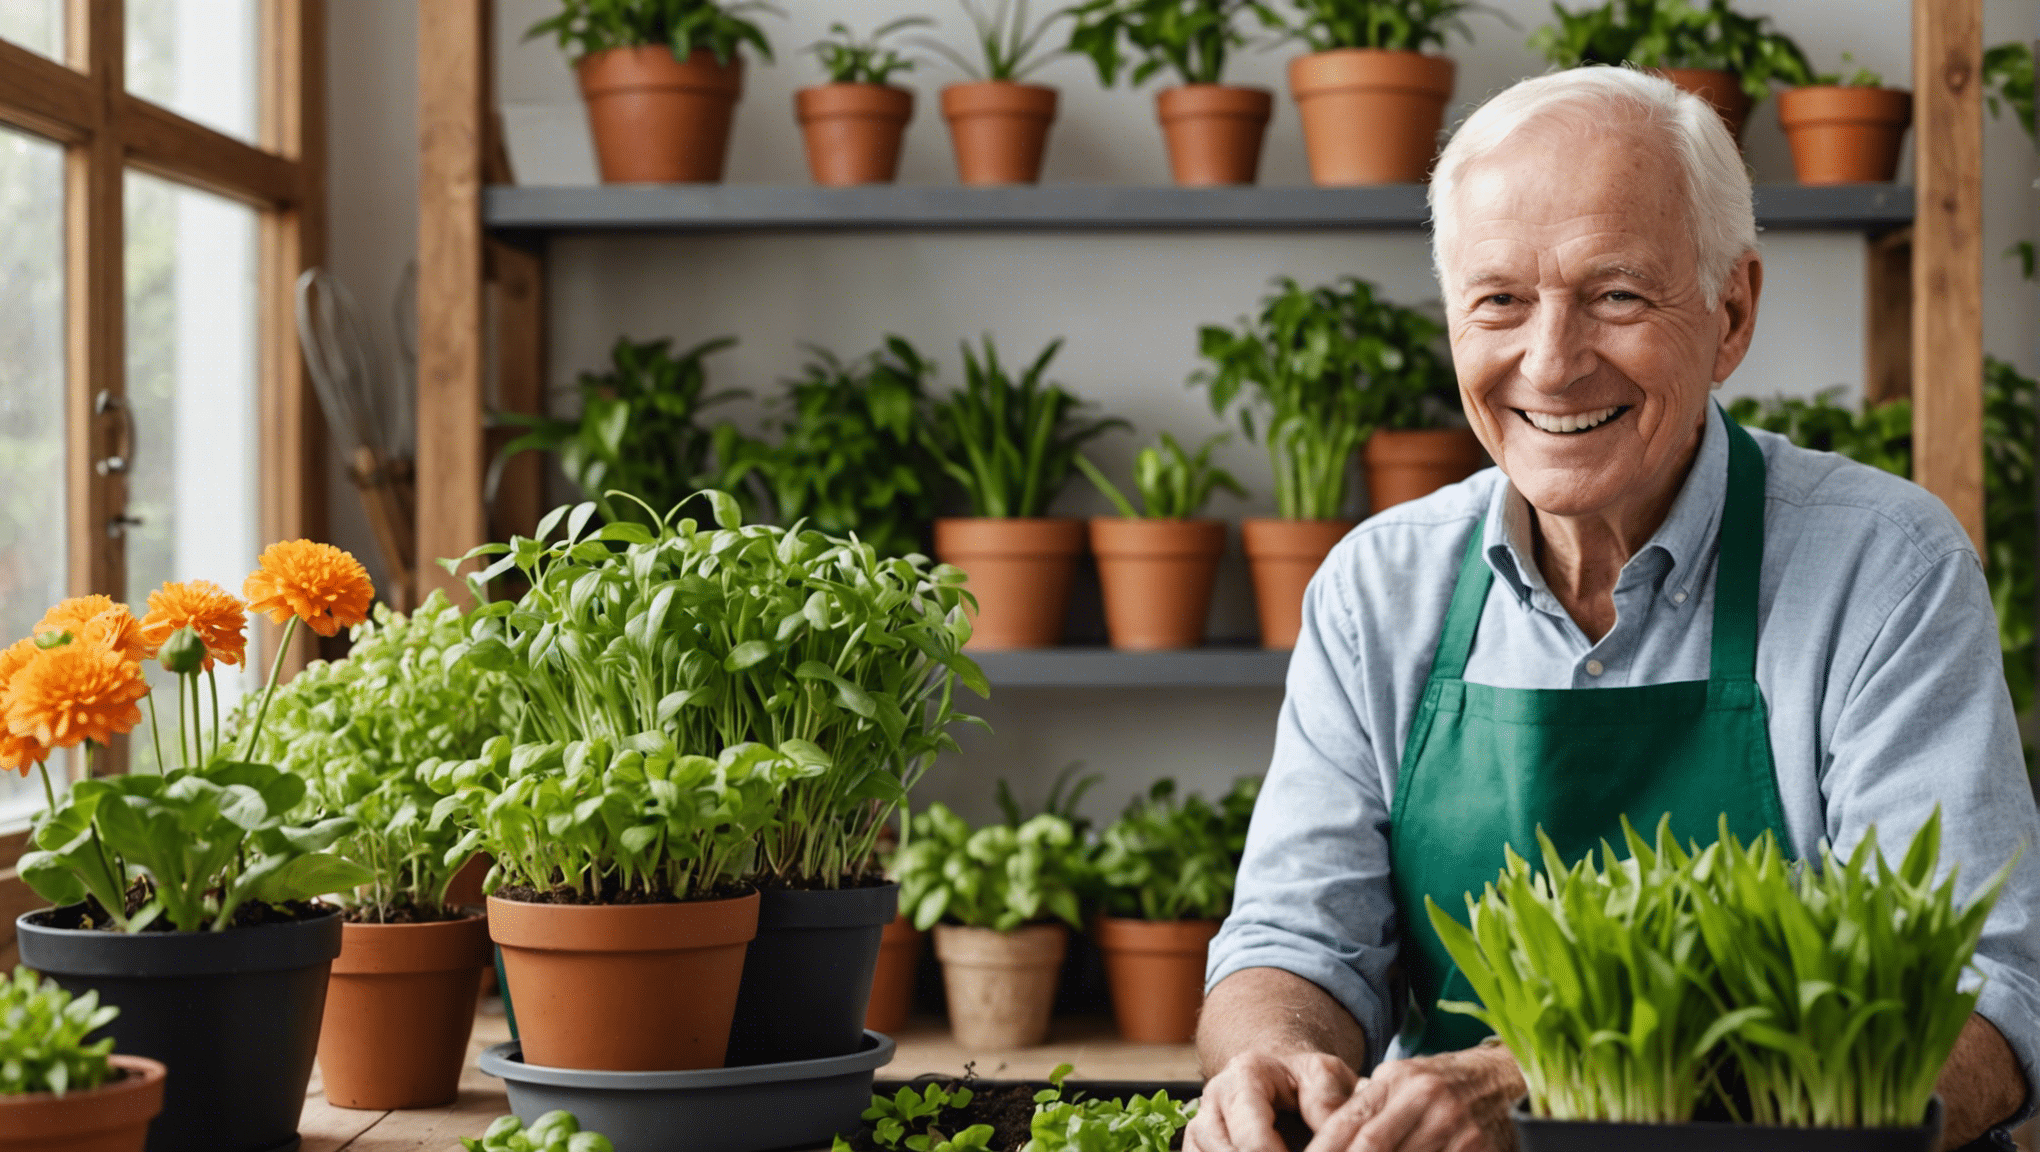 discover the benefits of indoor gardening ideas for seniors and how it can improve their overall well-being and quality of life.